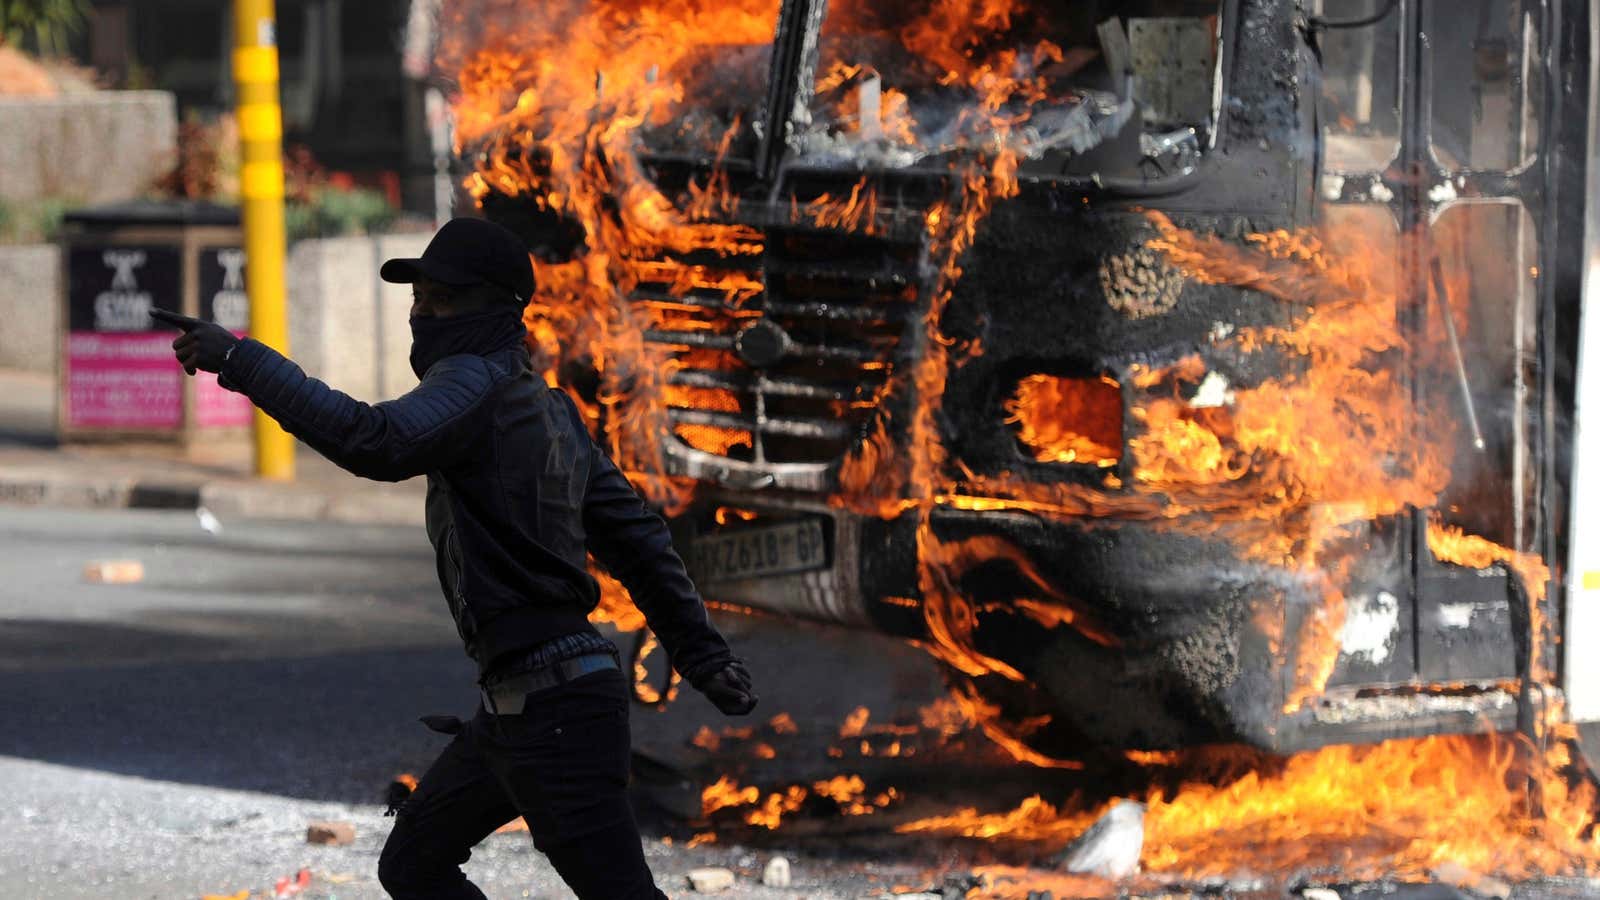 Protesting students in South Africa have set fire to university buildings and vehicles.